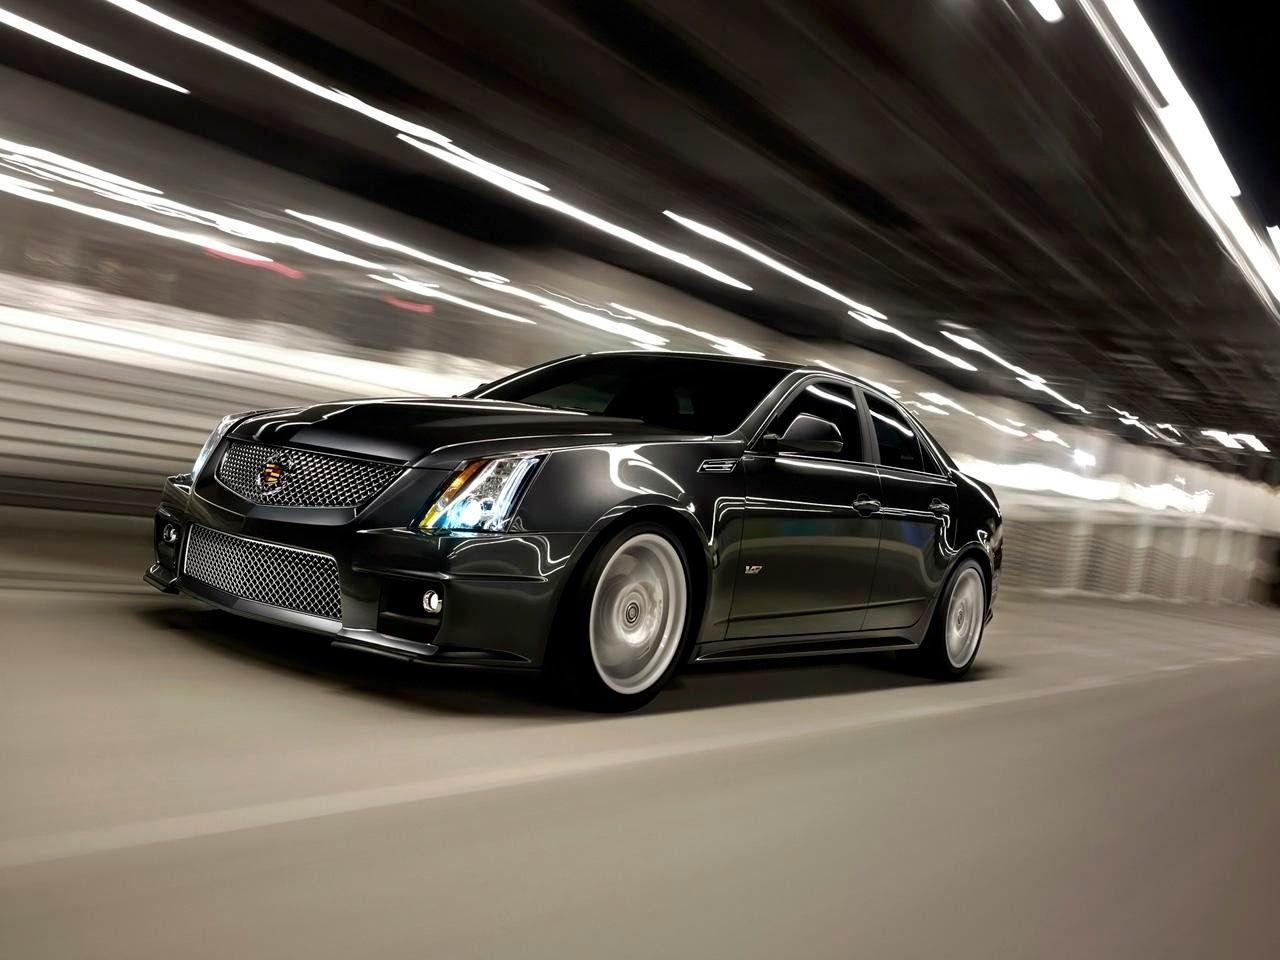 Amazing Cadillac Wallpaper for your PC HD